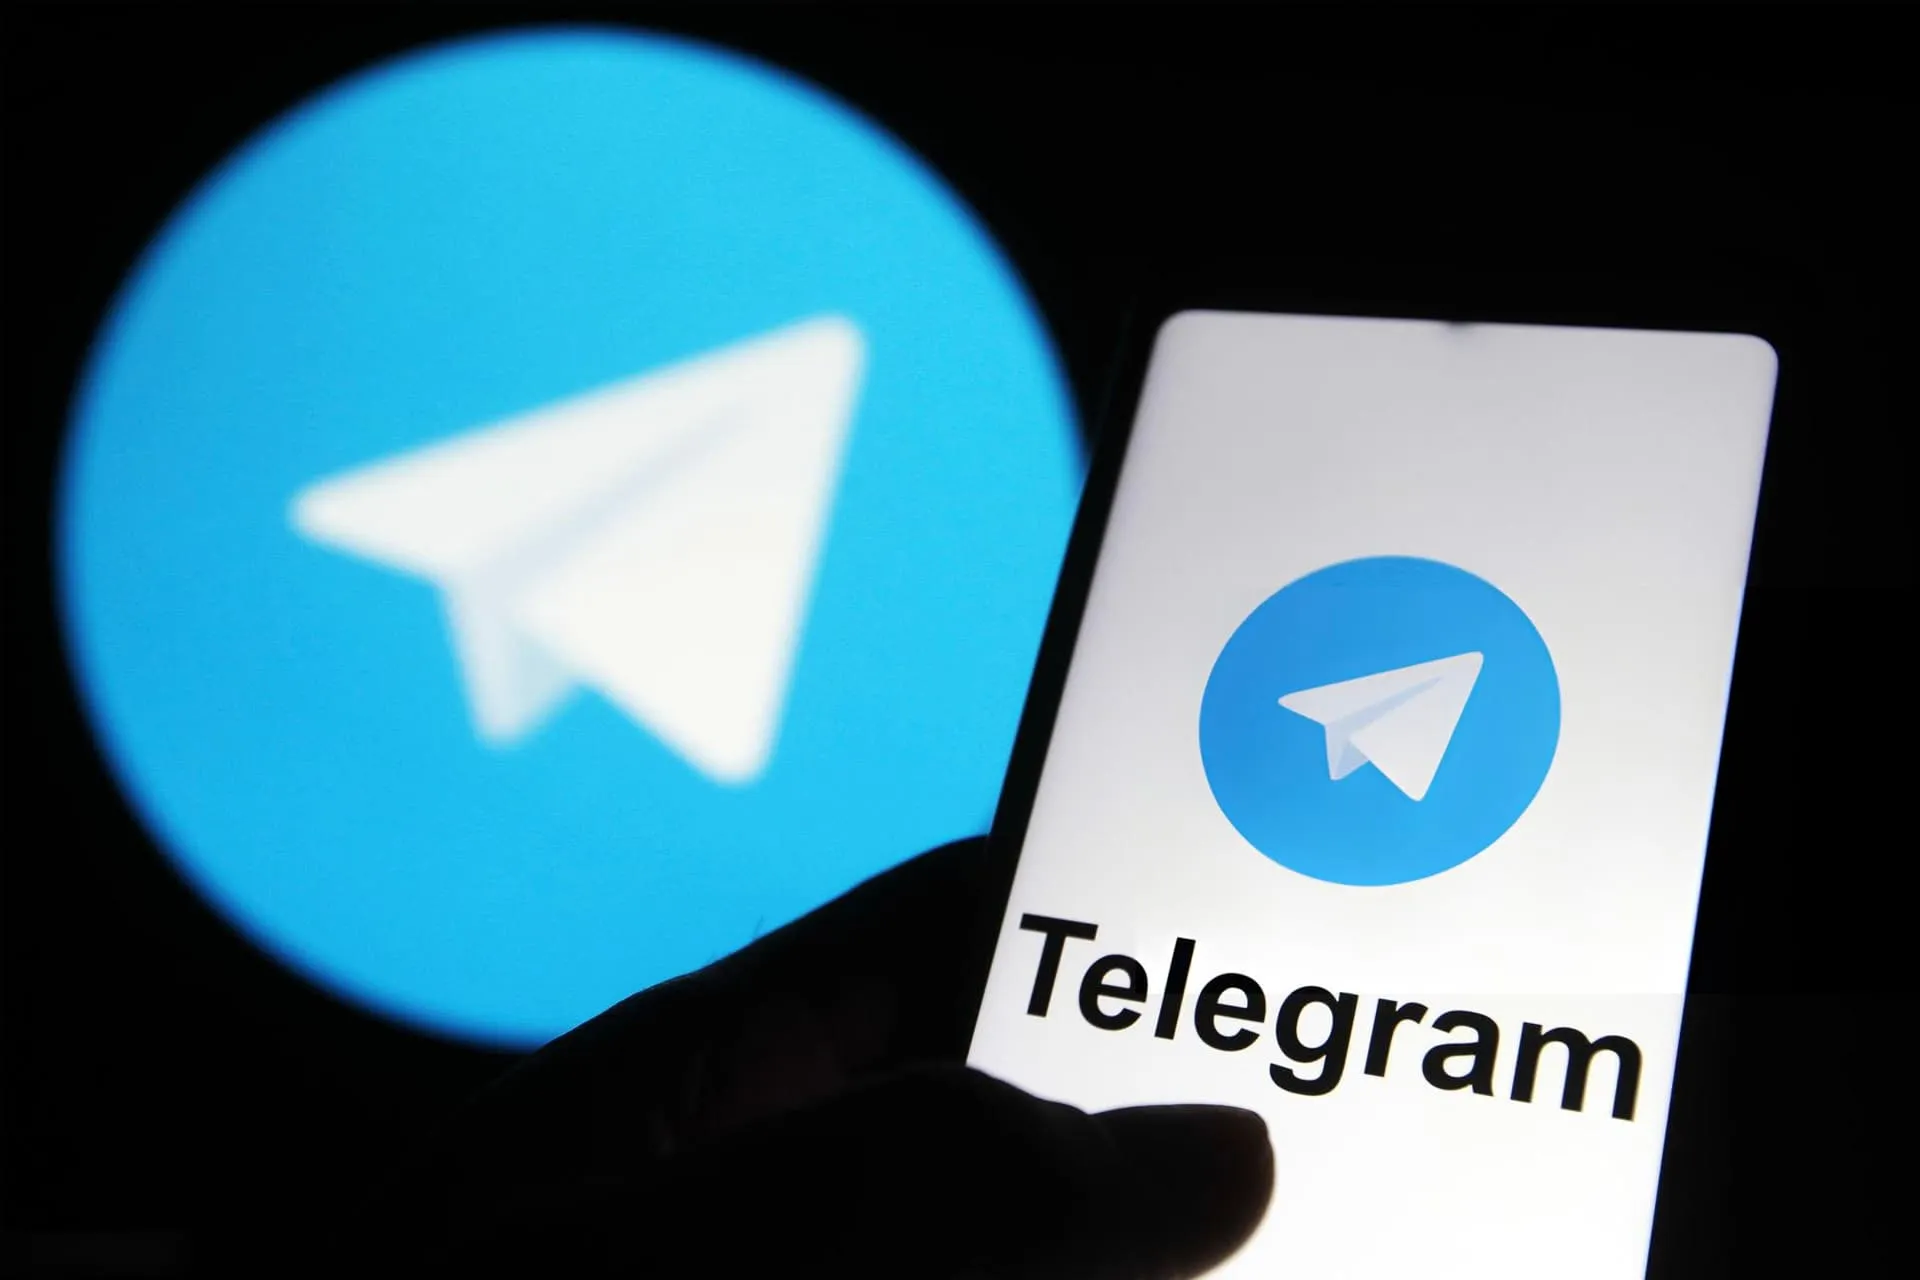 Telegram logo inside the phone and black and blue background